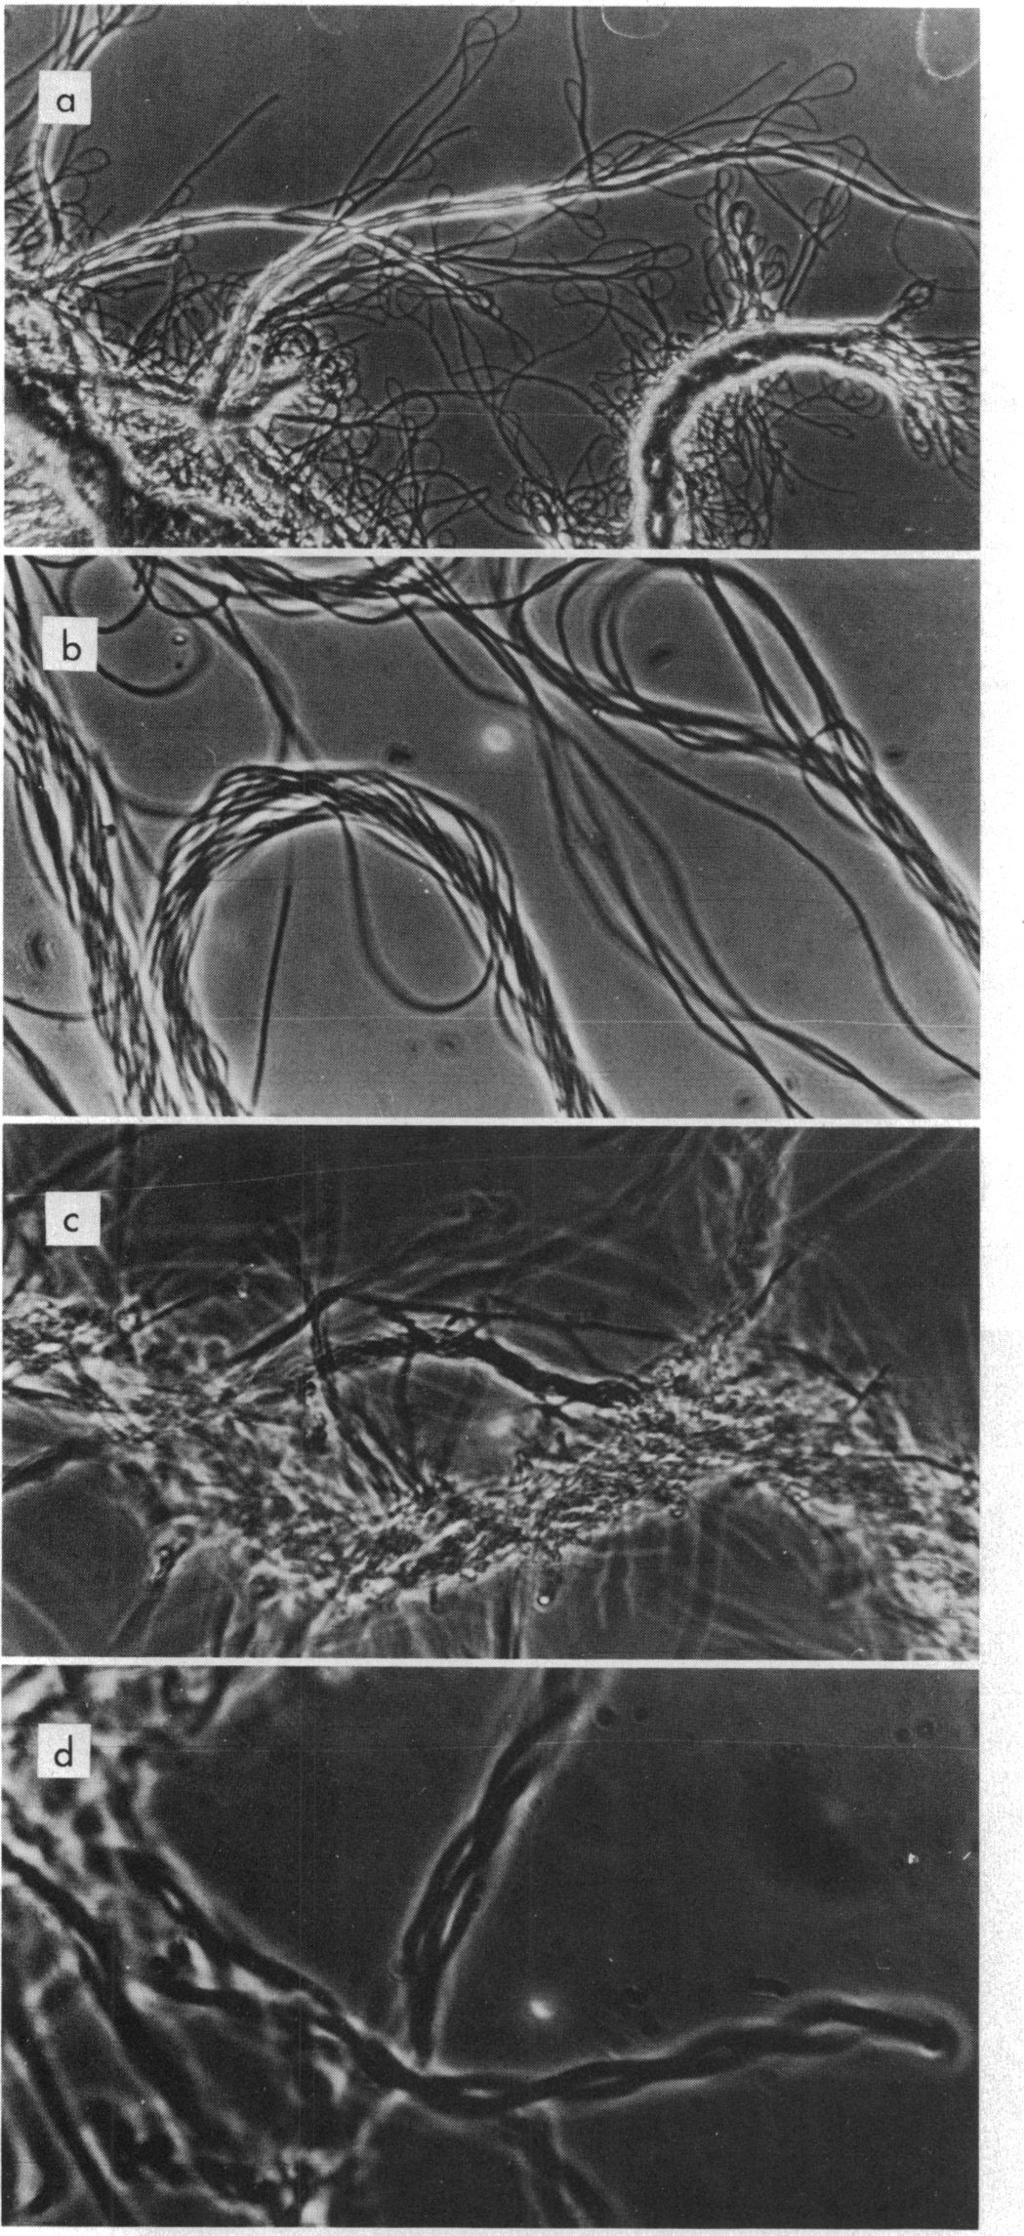 VOL. 158, 1984 FIG. 1. Helical growth of B. subtilis after spore outgrowth.